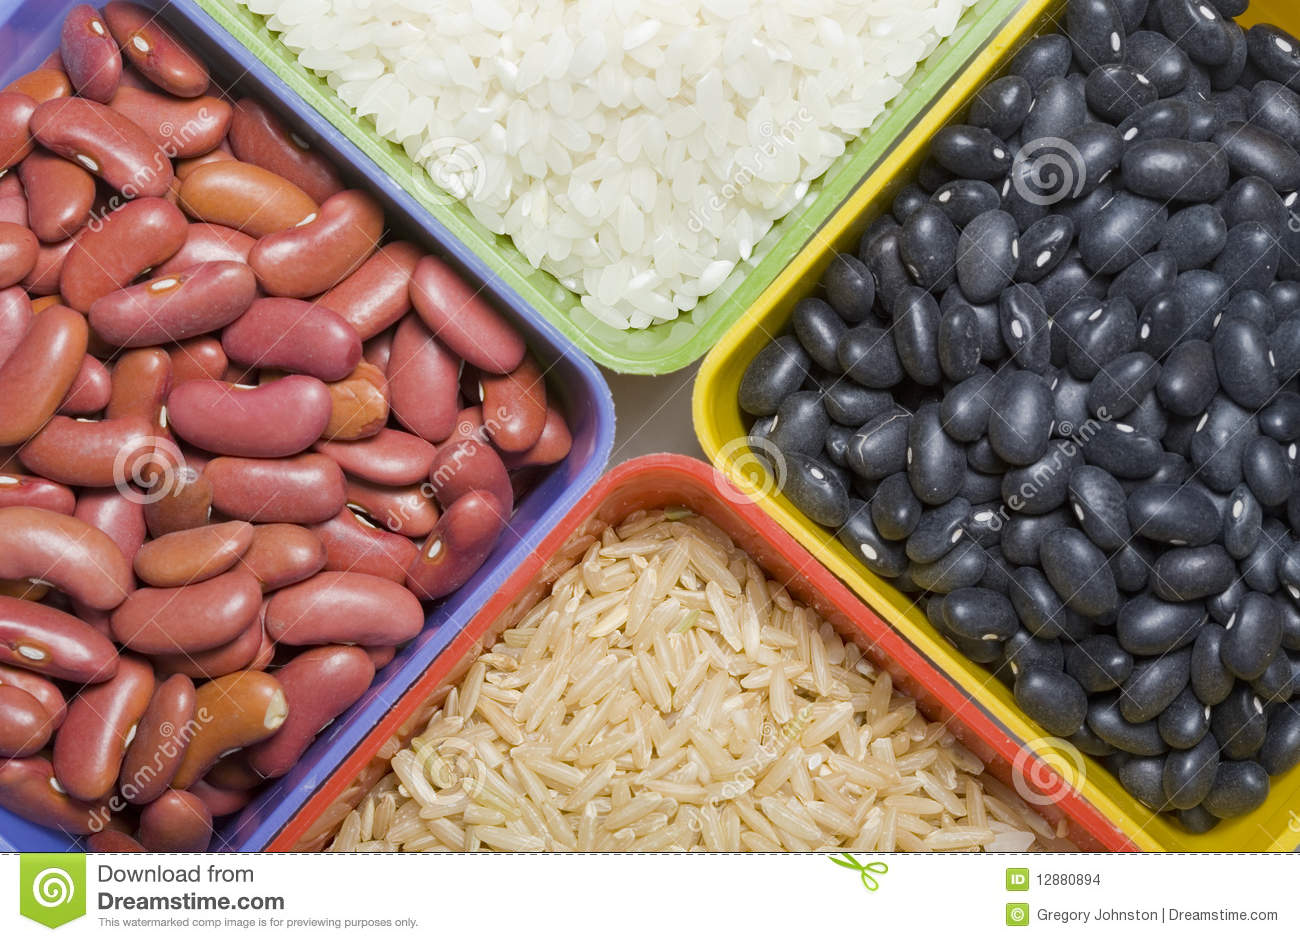 Beans And Rice  Stock Images   Image  12880894